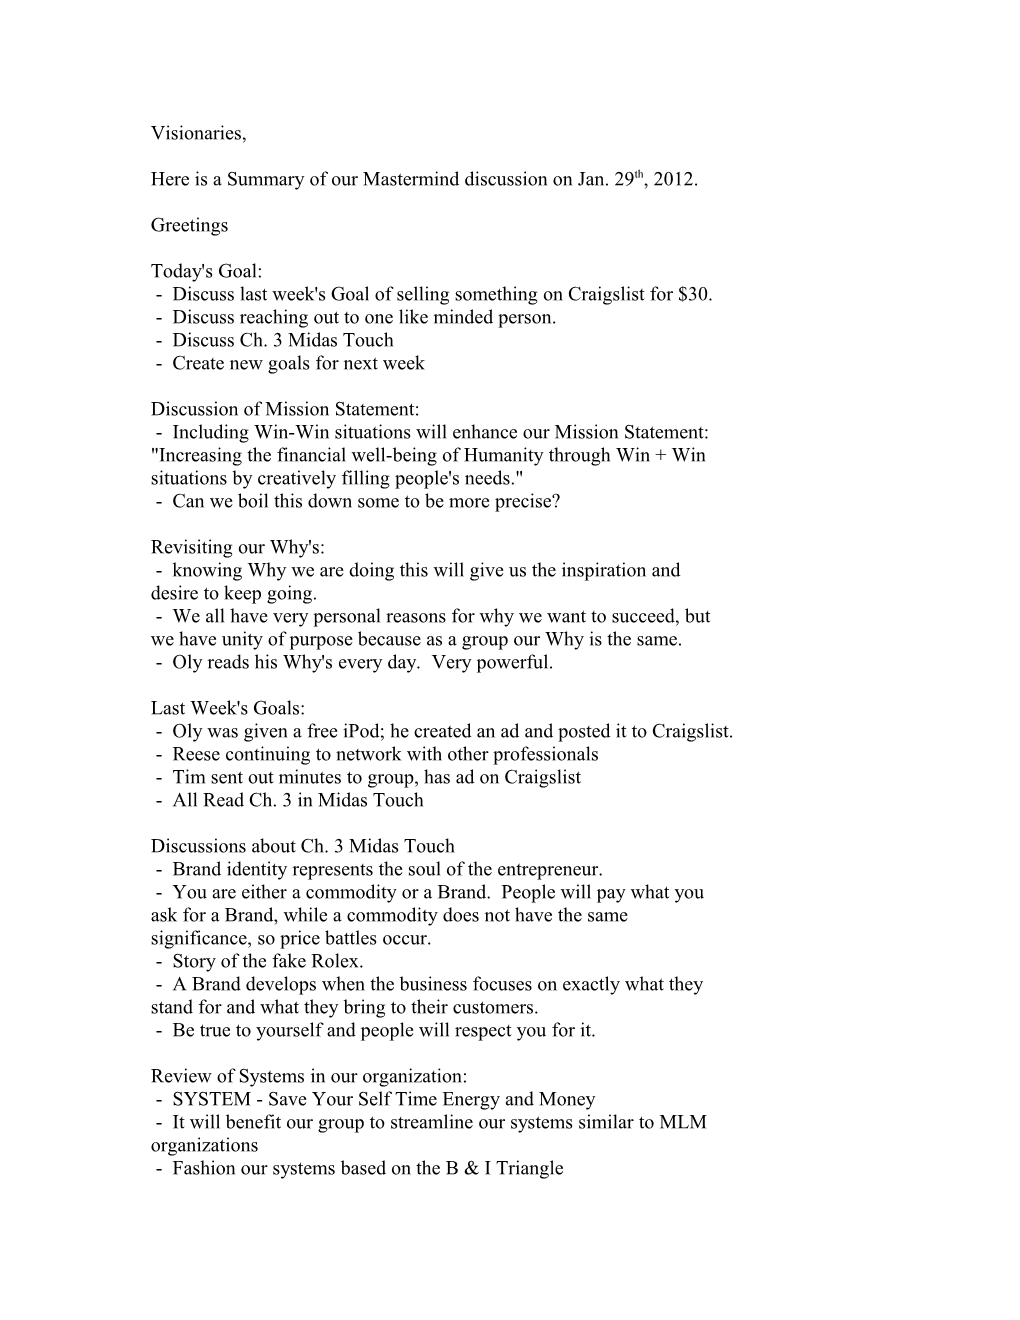 Visionaries, Here Is a Summary of Our Mastermind Discussion on Jan. 29Th, 2012. Greetings